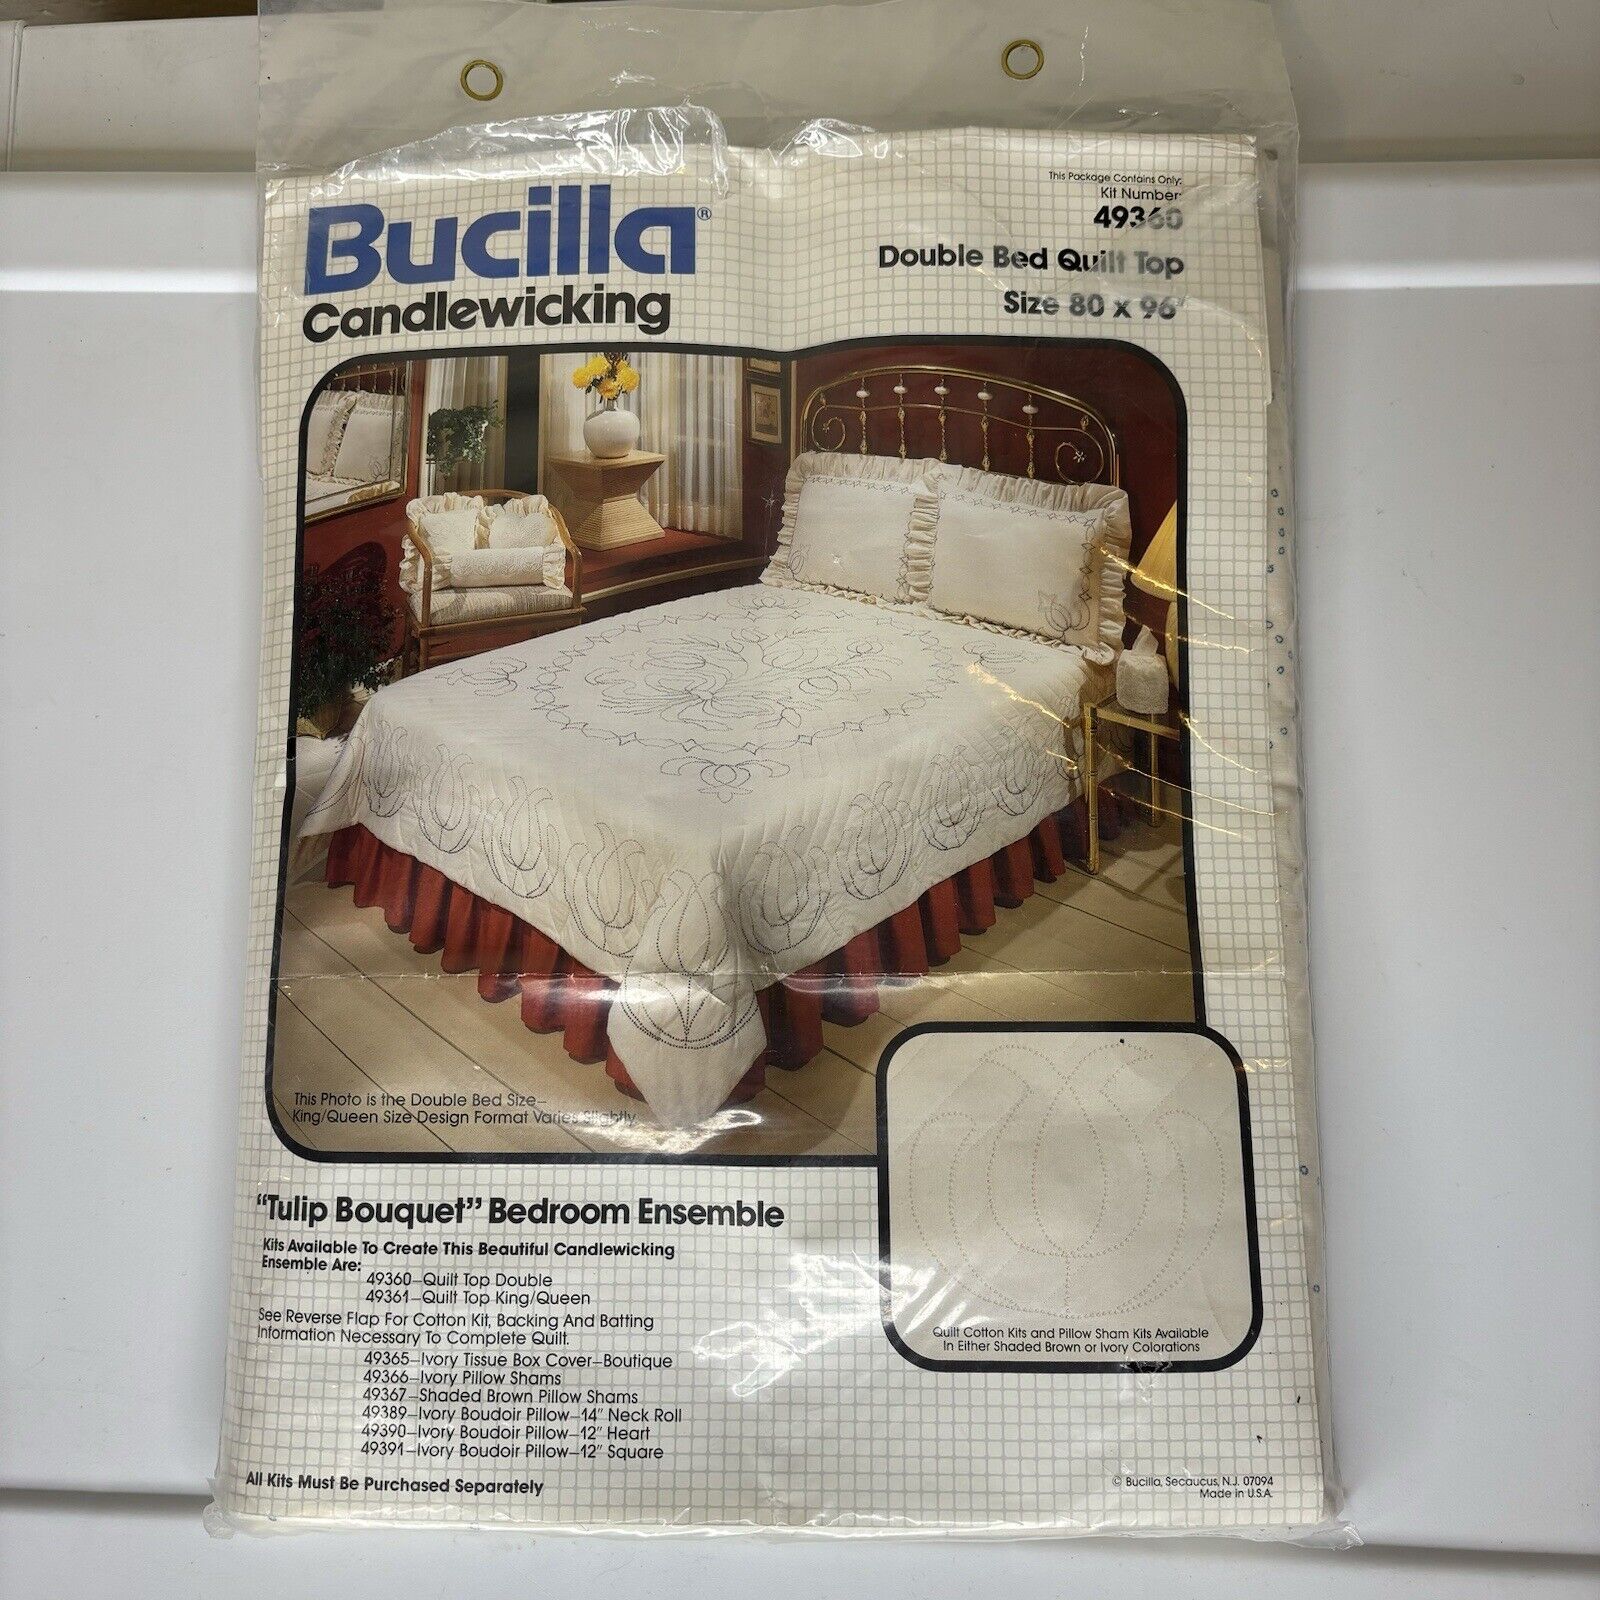 VTG Bucilla Candlewicking Double Bed Tulip Bouquet Quilt Top Kit 49360 Ivory NOS